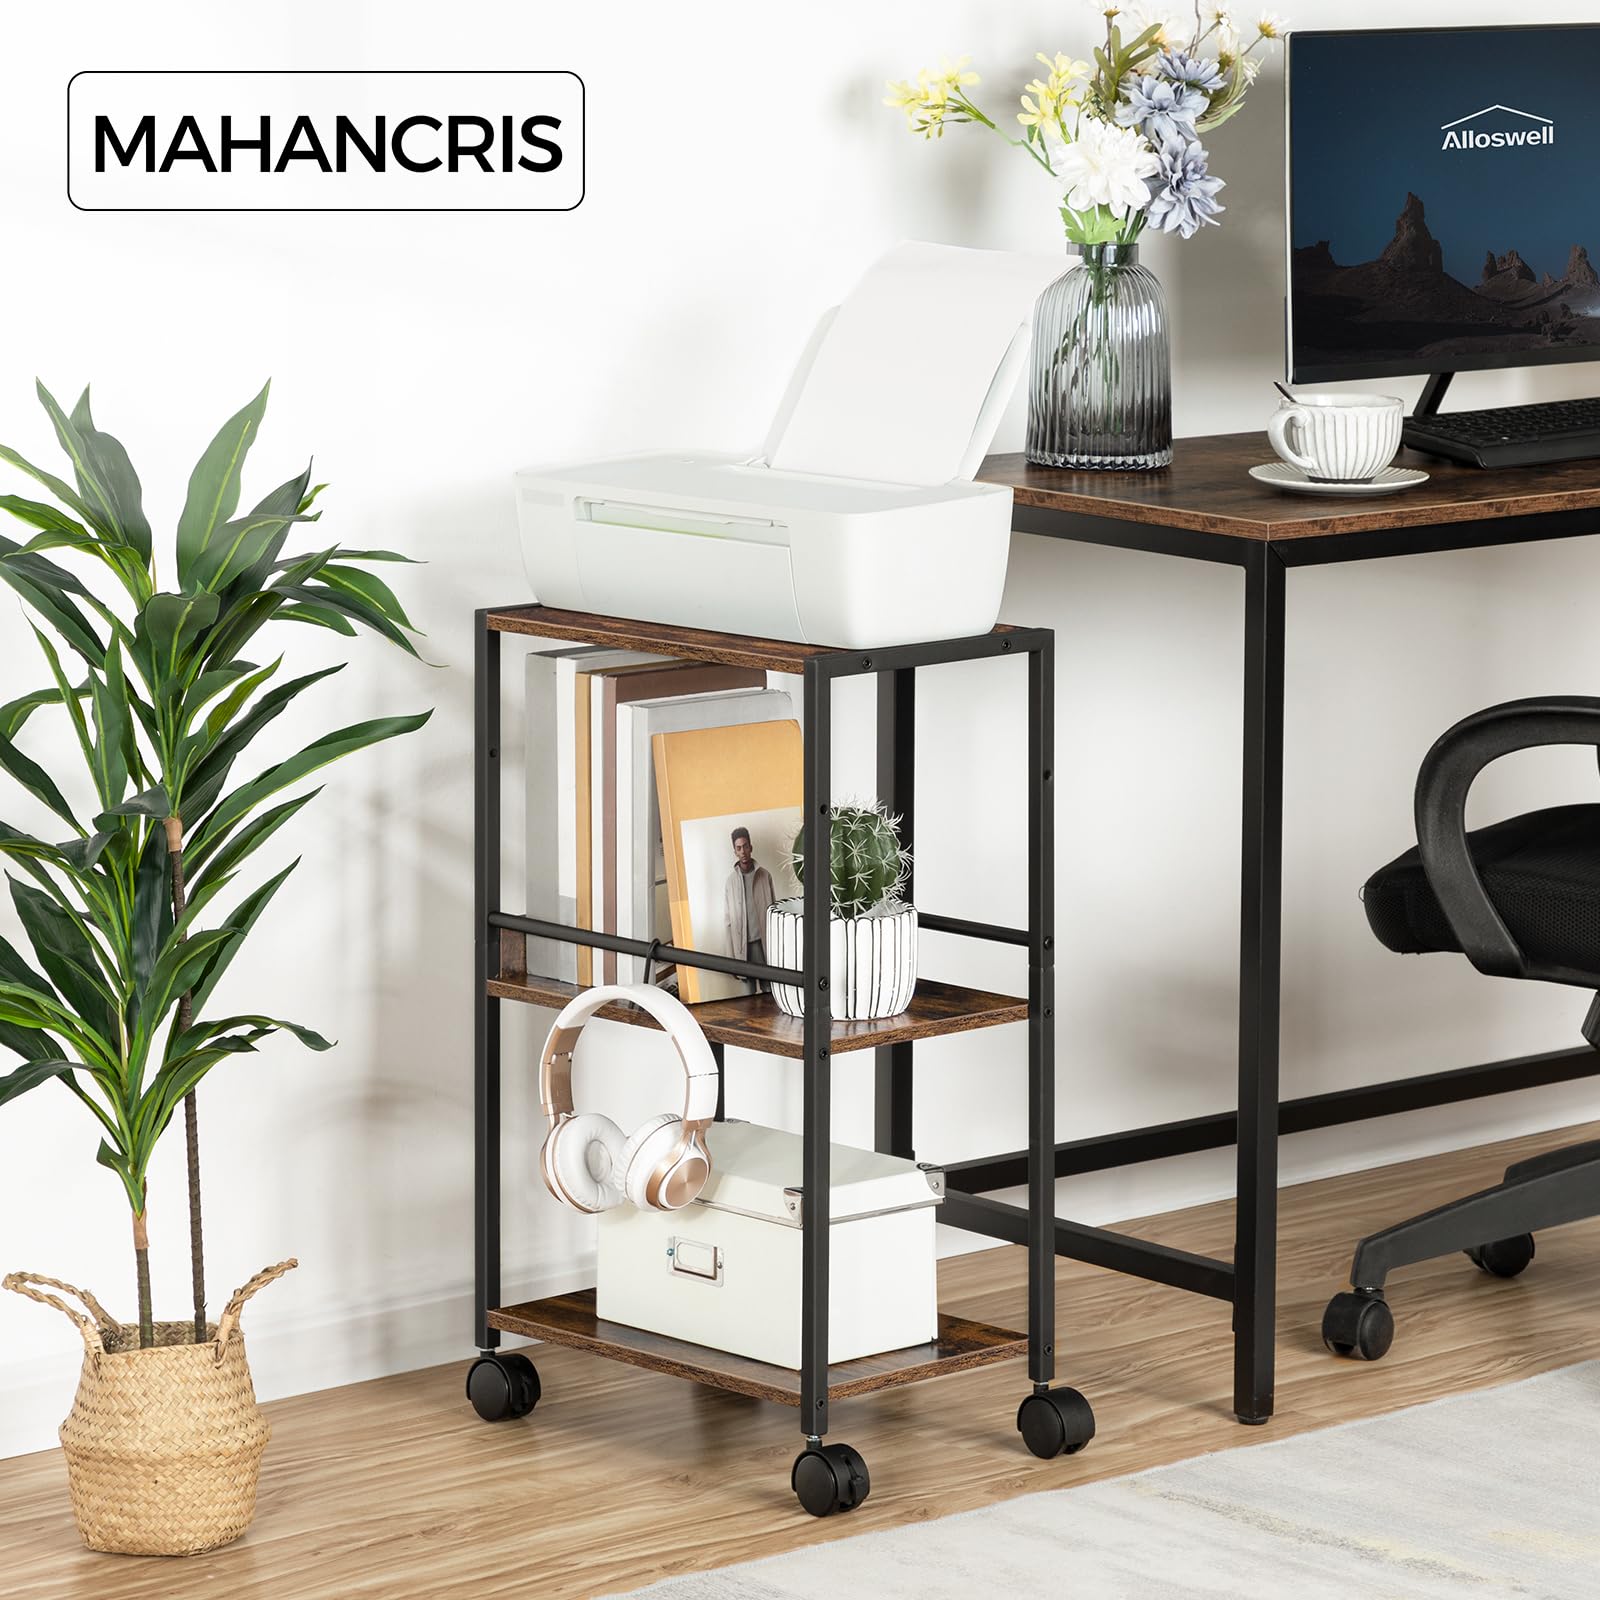 MAHANCRIS Printer Stand with Adjustable Storage Shelf, 3-Tier Computer Tower Stand with 2 Hooks, Rolling Printer Cart for Home Office Small Spaces, CPU Stand with Wheels, Rustic Brown PTHR6001Z